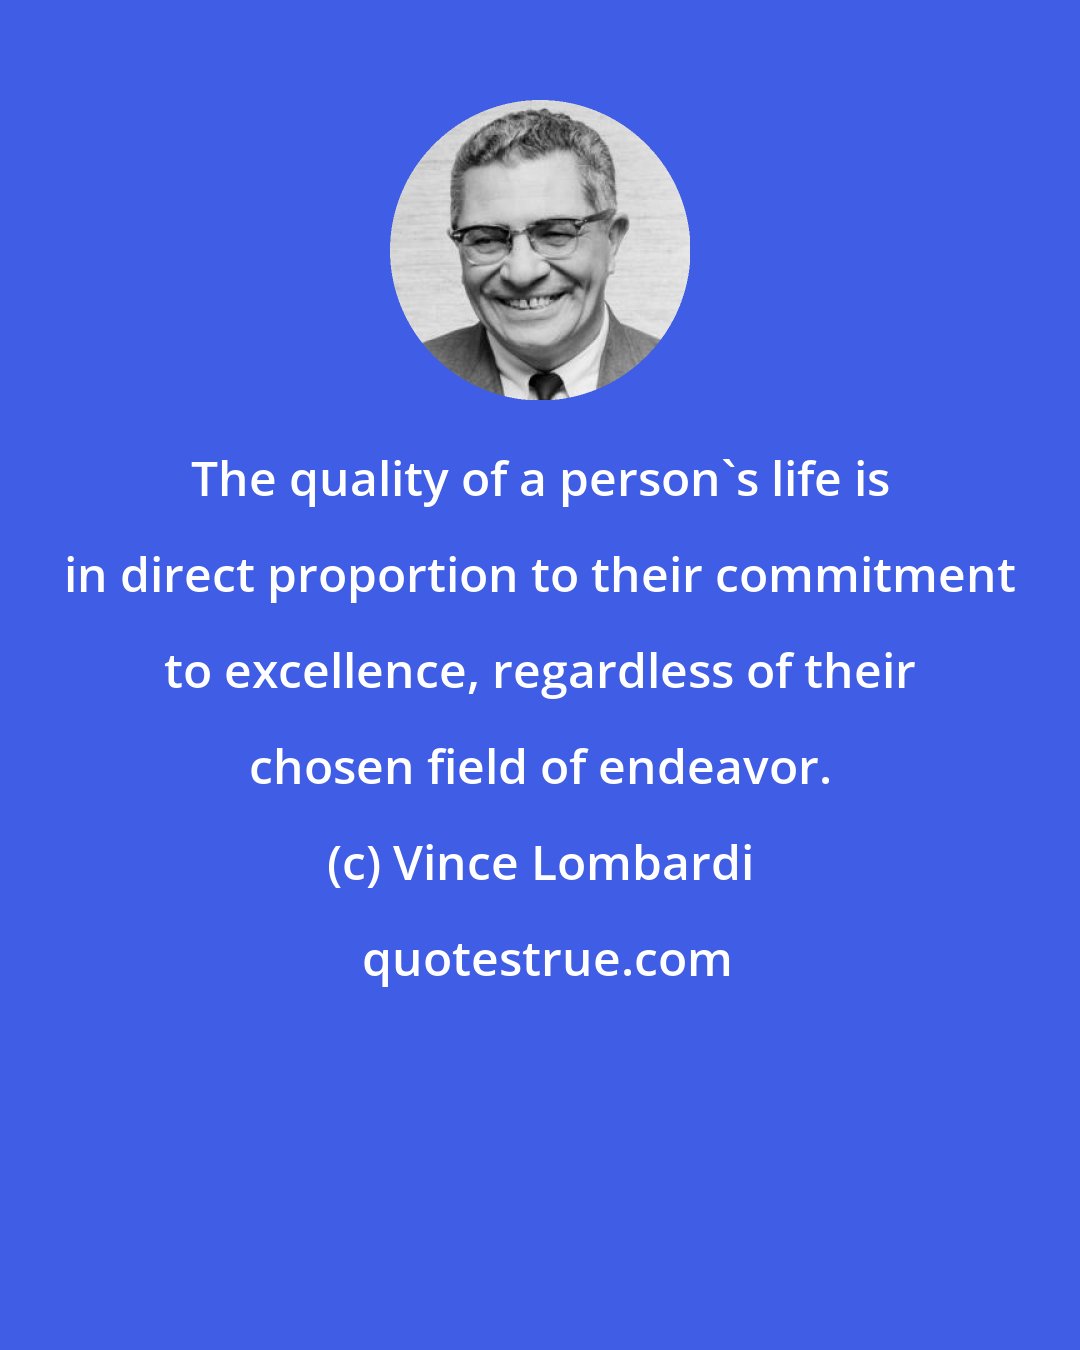 Vince Lombardi: The quality of a person's life is in direct proportion to their commitment to excellence, regardless of their chosen field of endeavor.